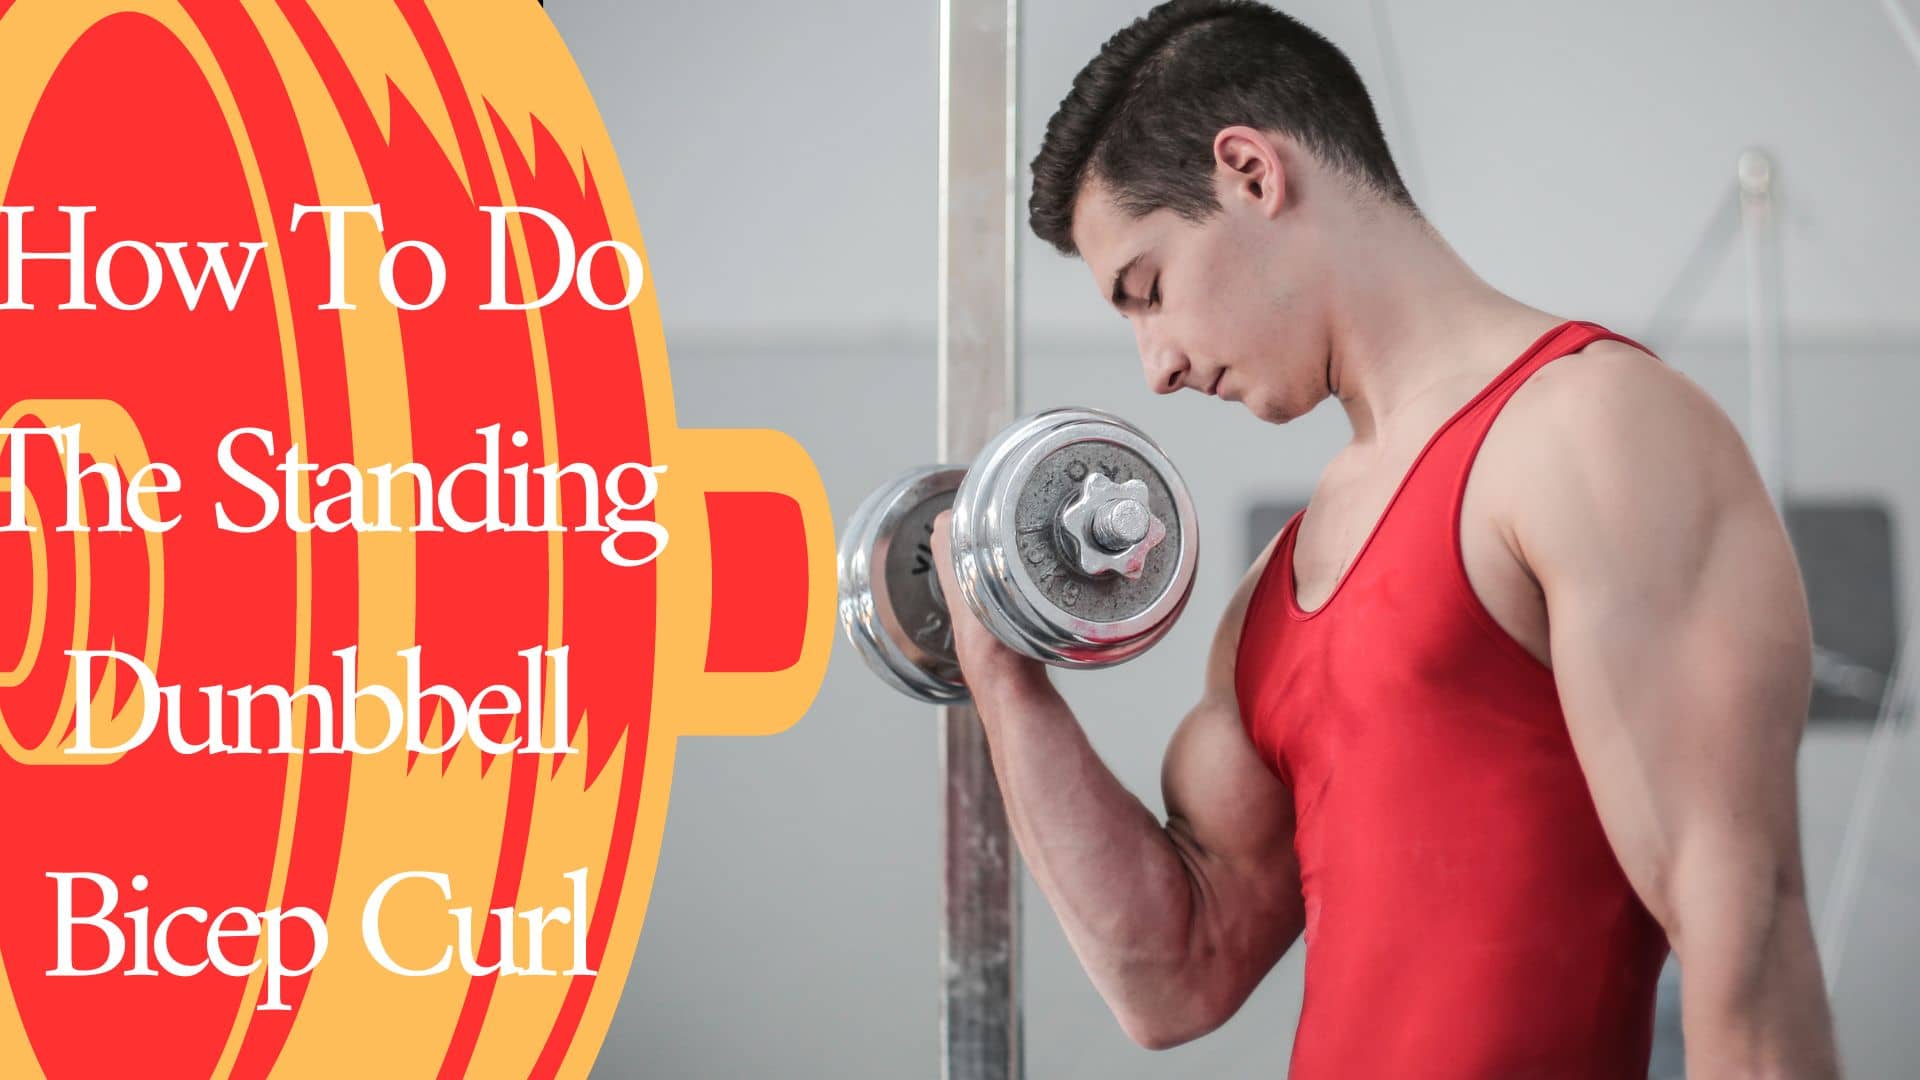 How To Do The Standing Dumbbell Bicep Curl